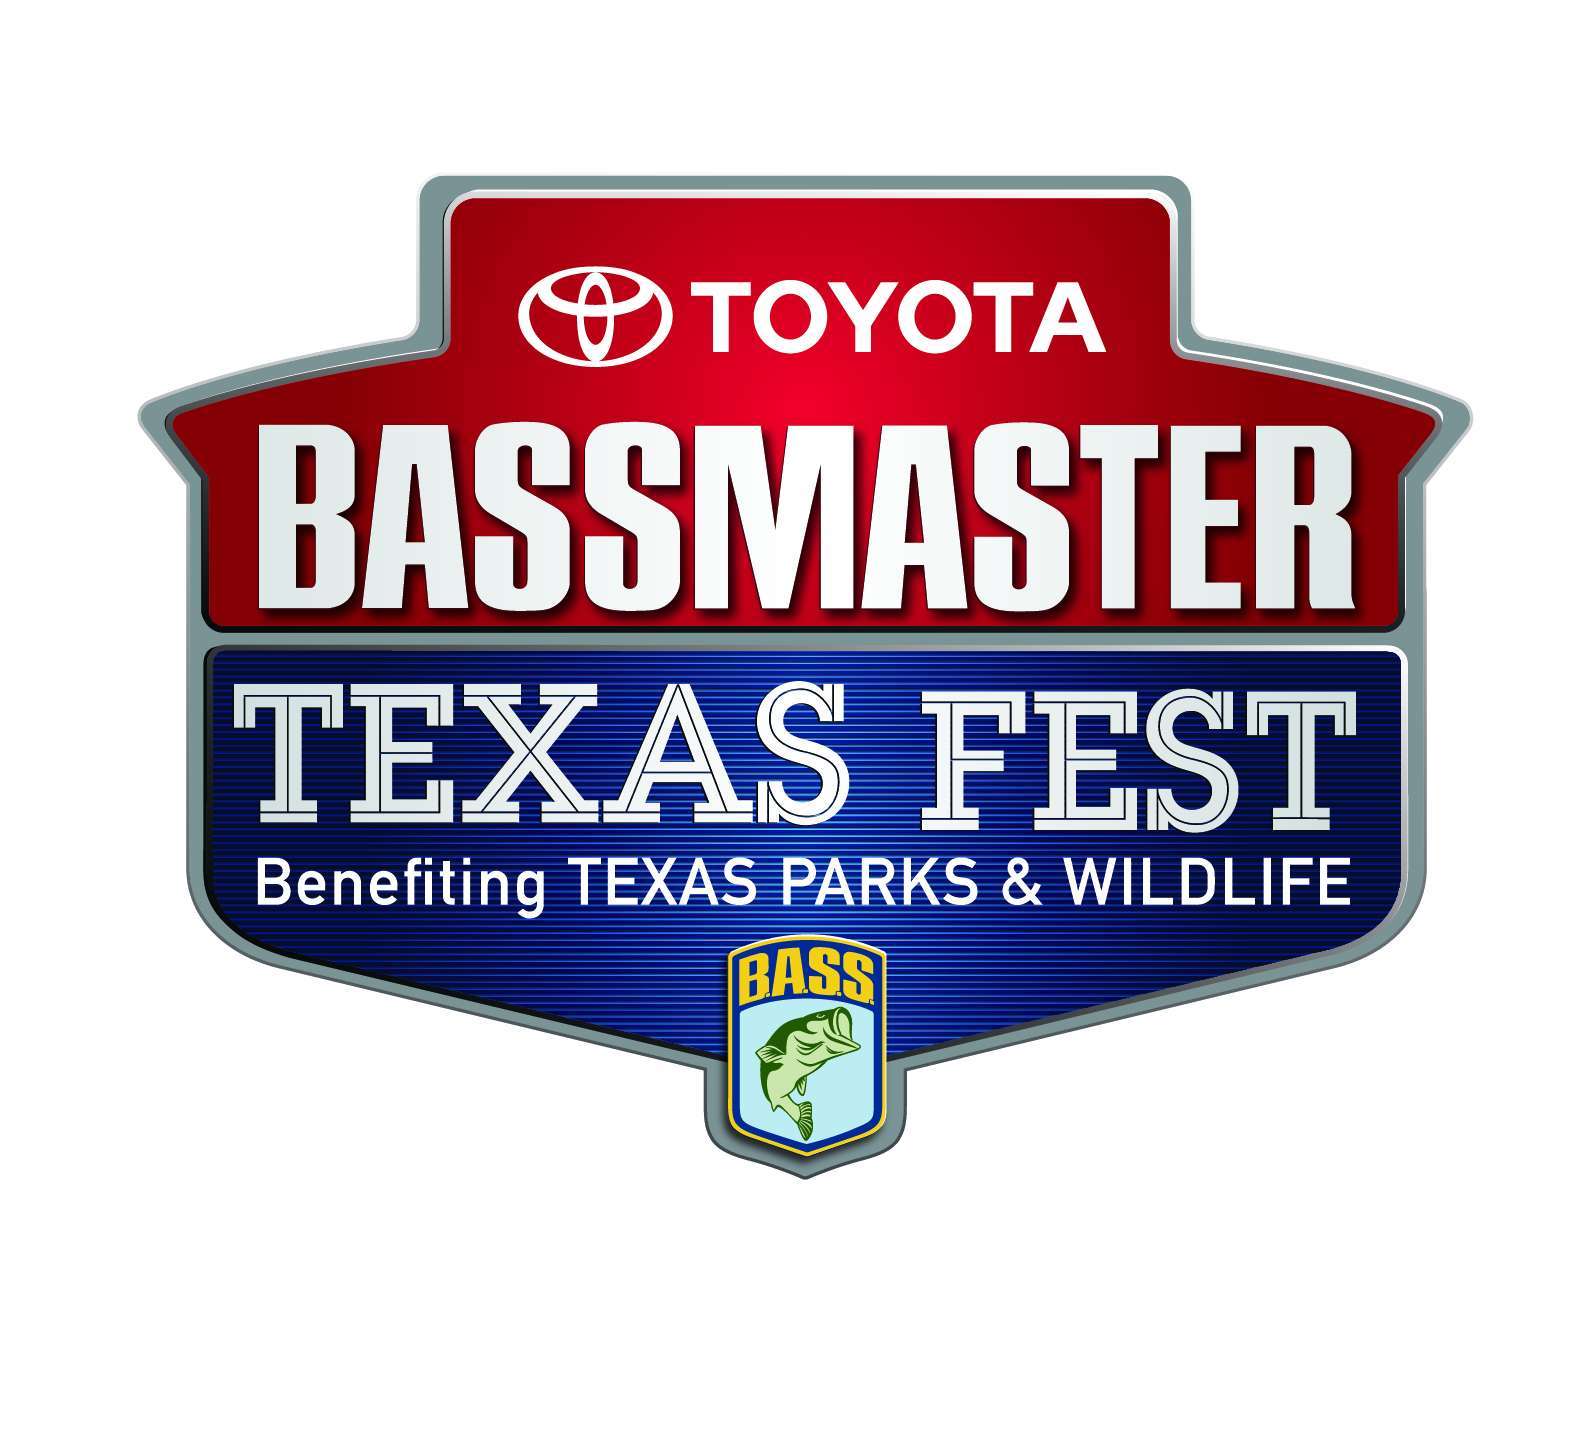 Stop No. 5 of the 2019 Bassmaster Elite Series has the anglers on famed Lake Fork this week for the Toyota Bassmaster Texas Fest benefiting Texas Parks & Wildlife Department.